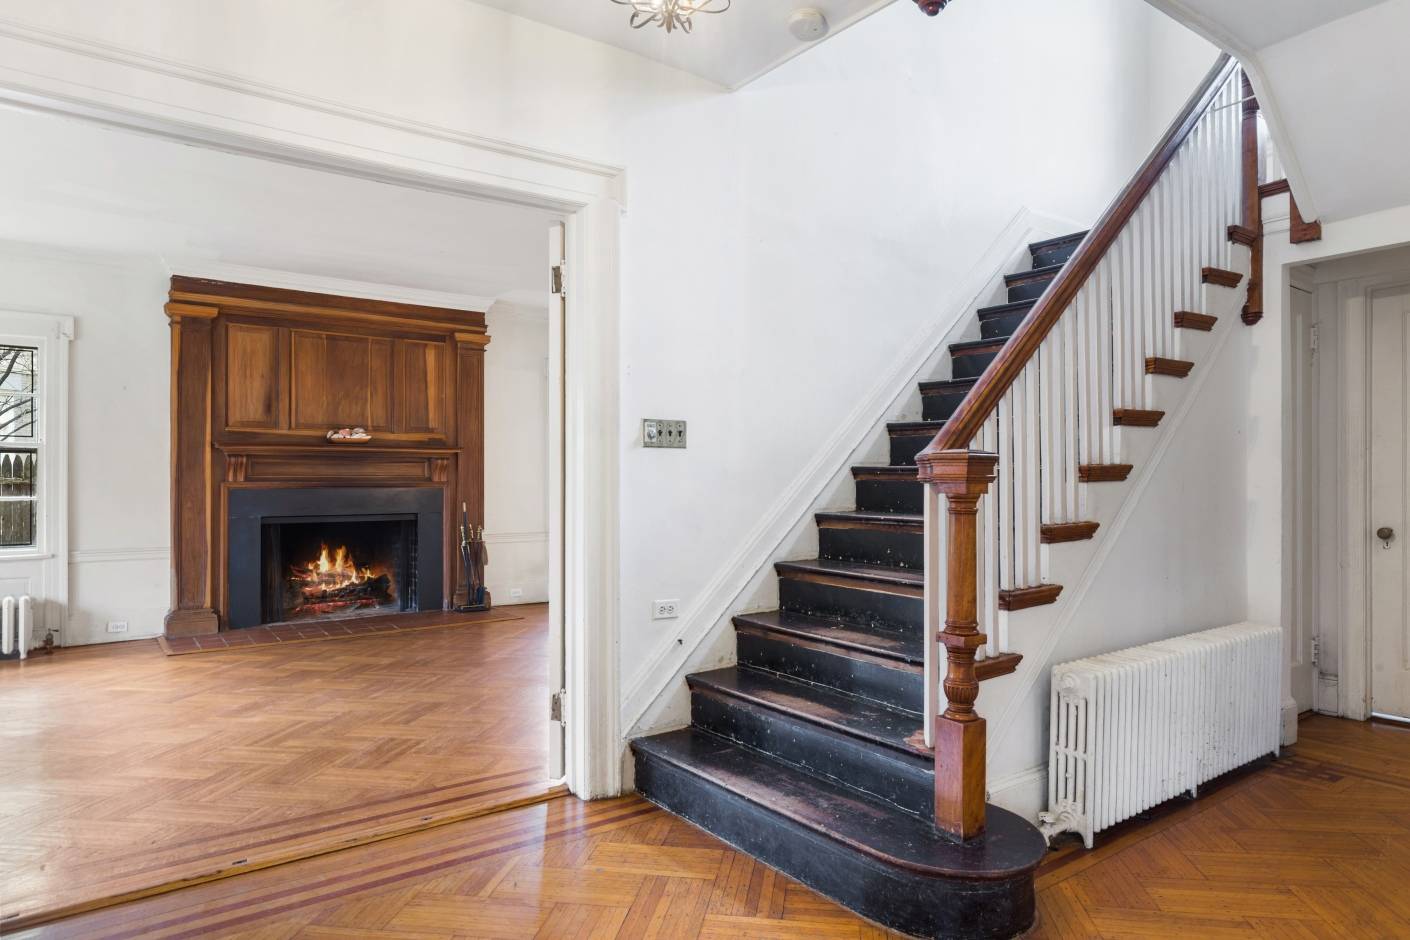 Located in the most coveted Cul de Sac in Historic Prospect Park South, and nestled amongst an impressive variety of architecturally significant houses, this enchanting 5 Bedroom, 3.